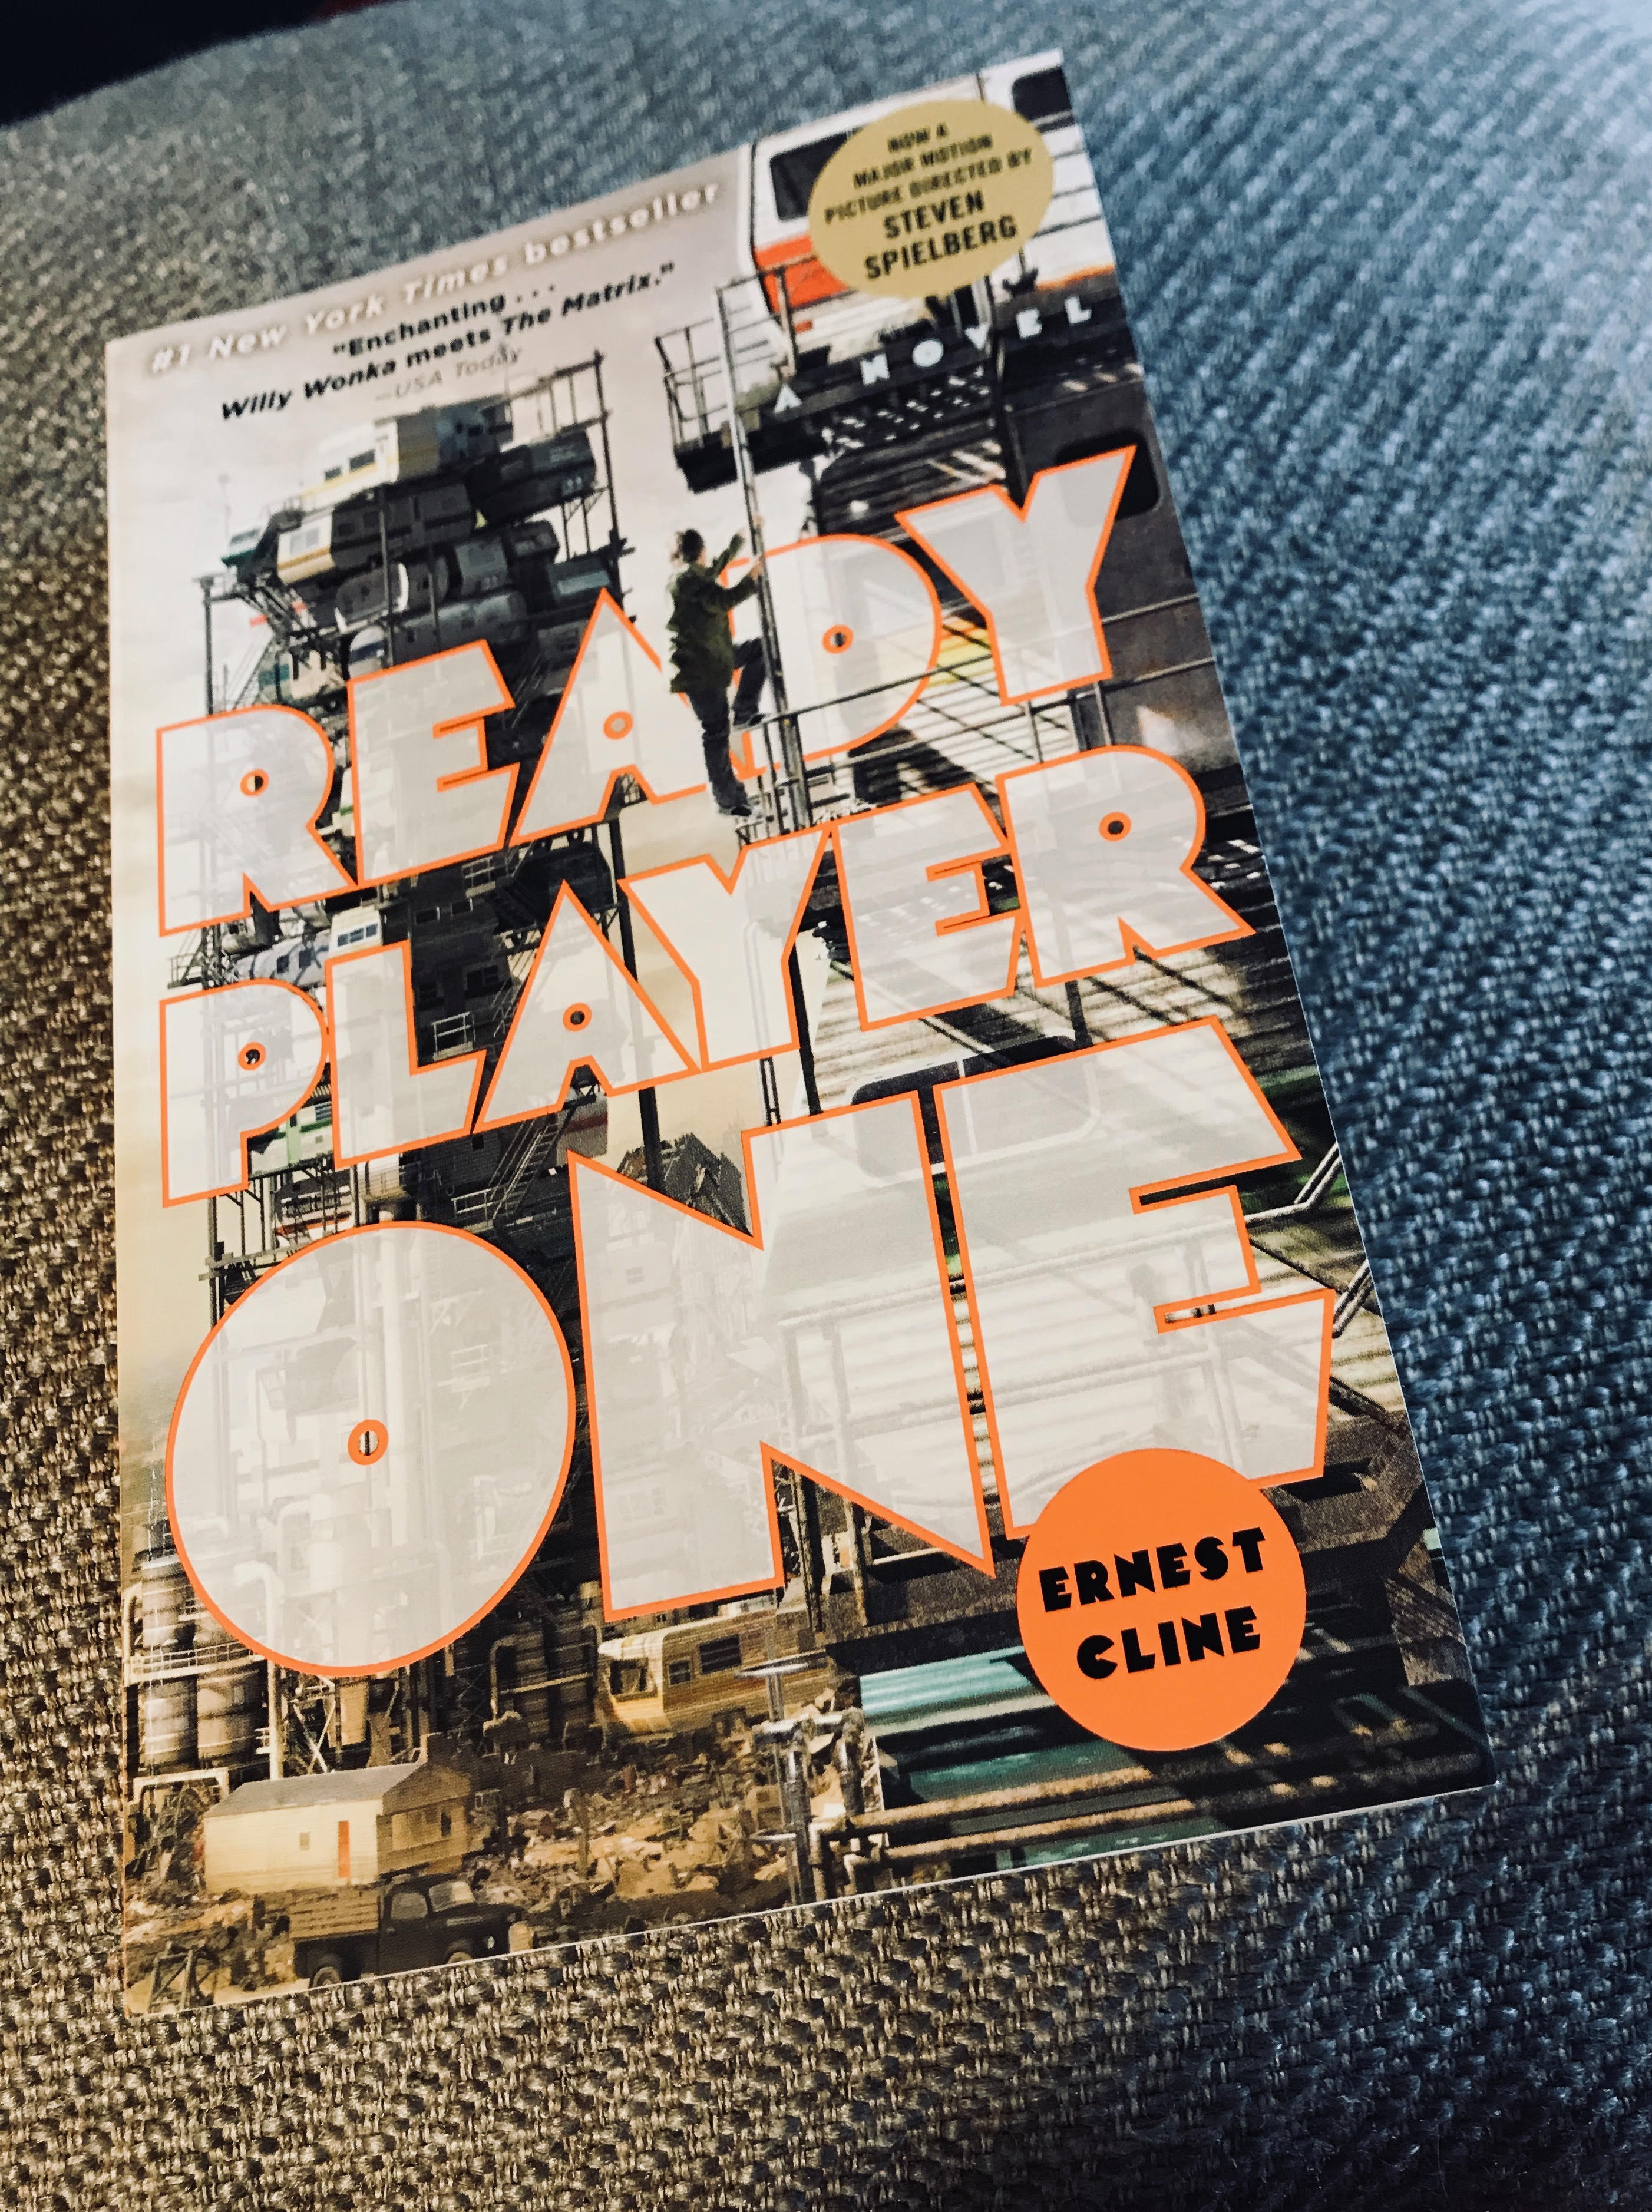 Ready Player One by Ernest Cline, Paperback